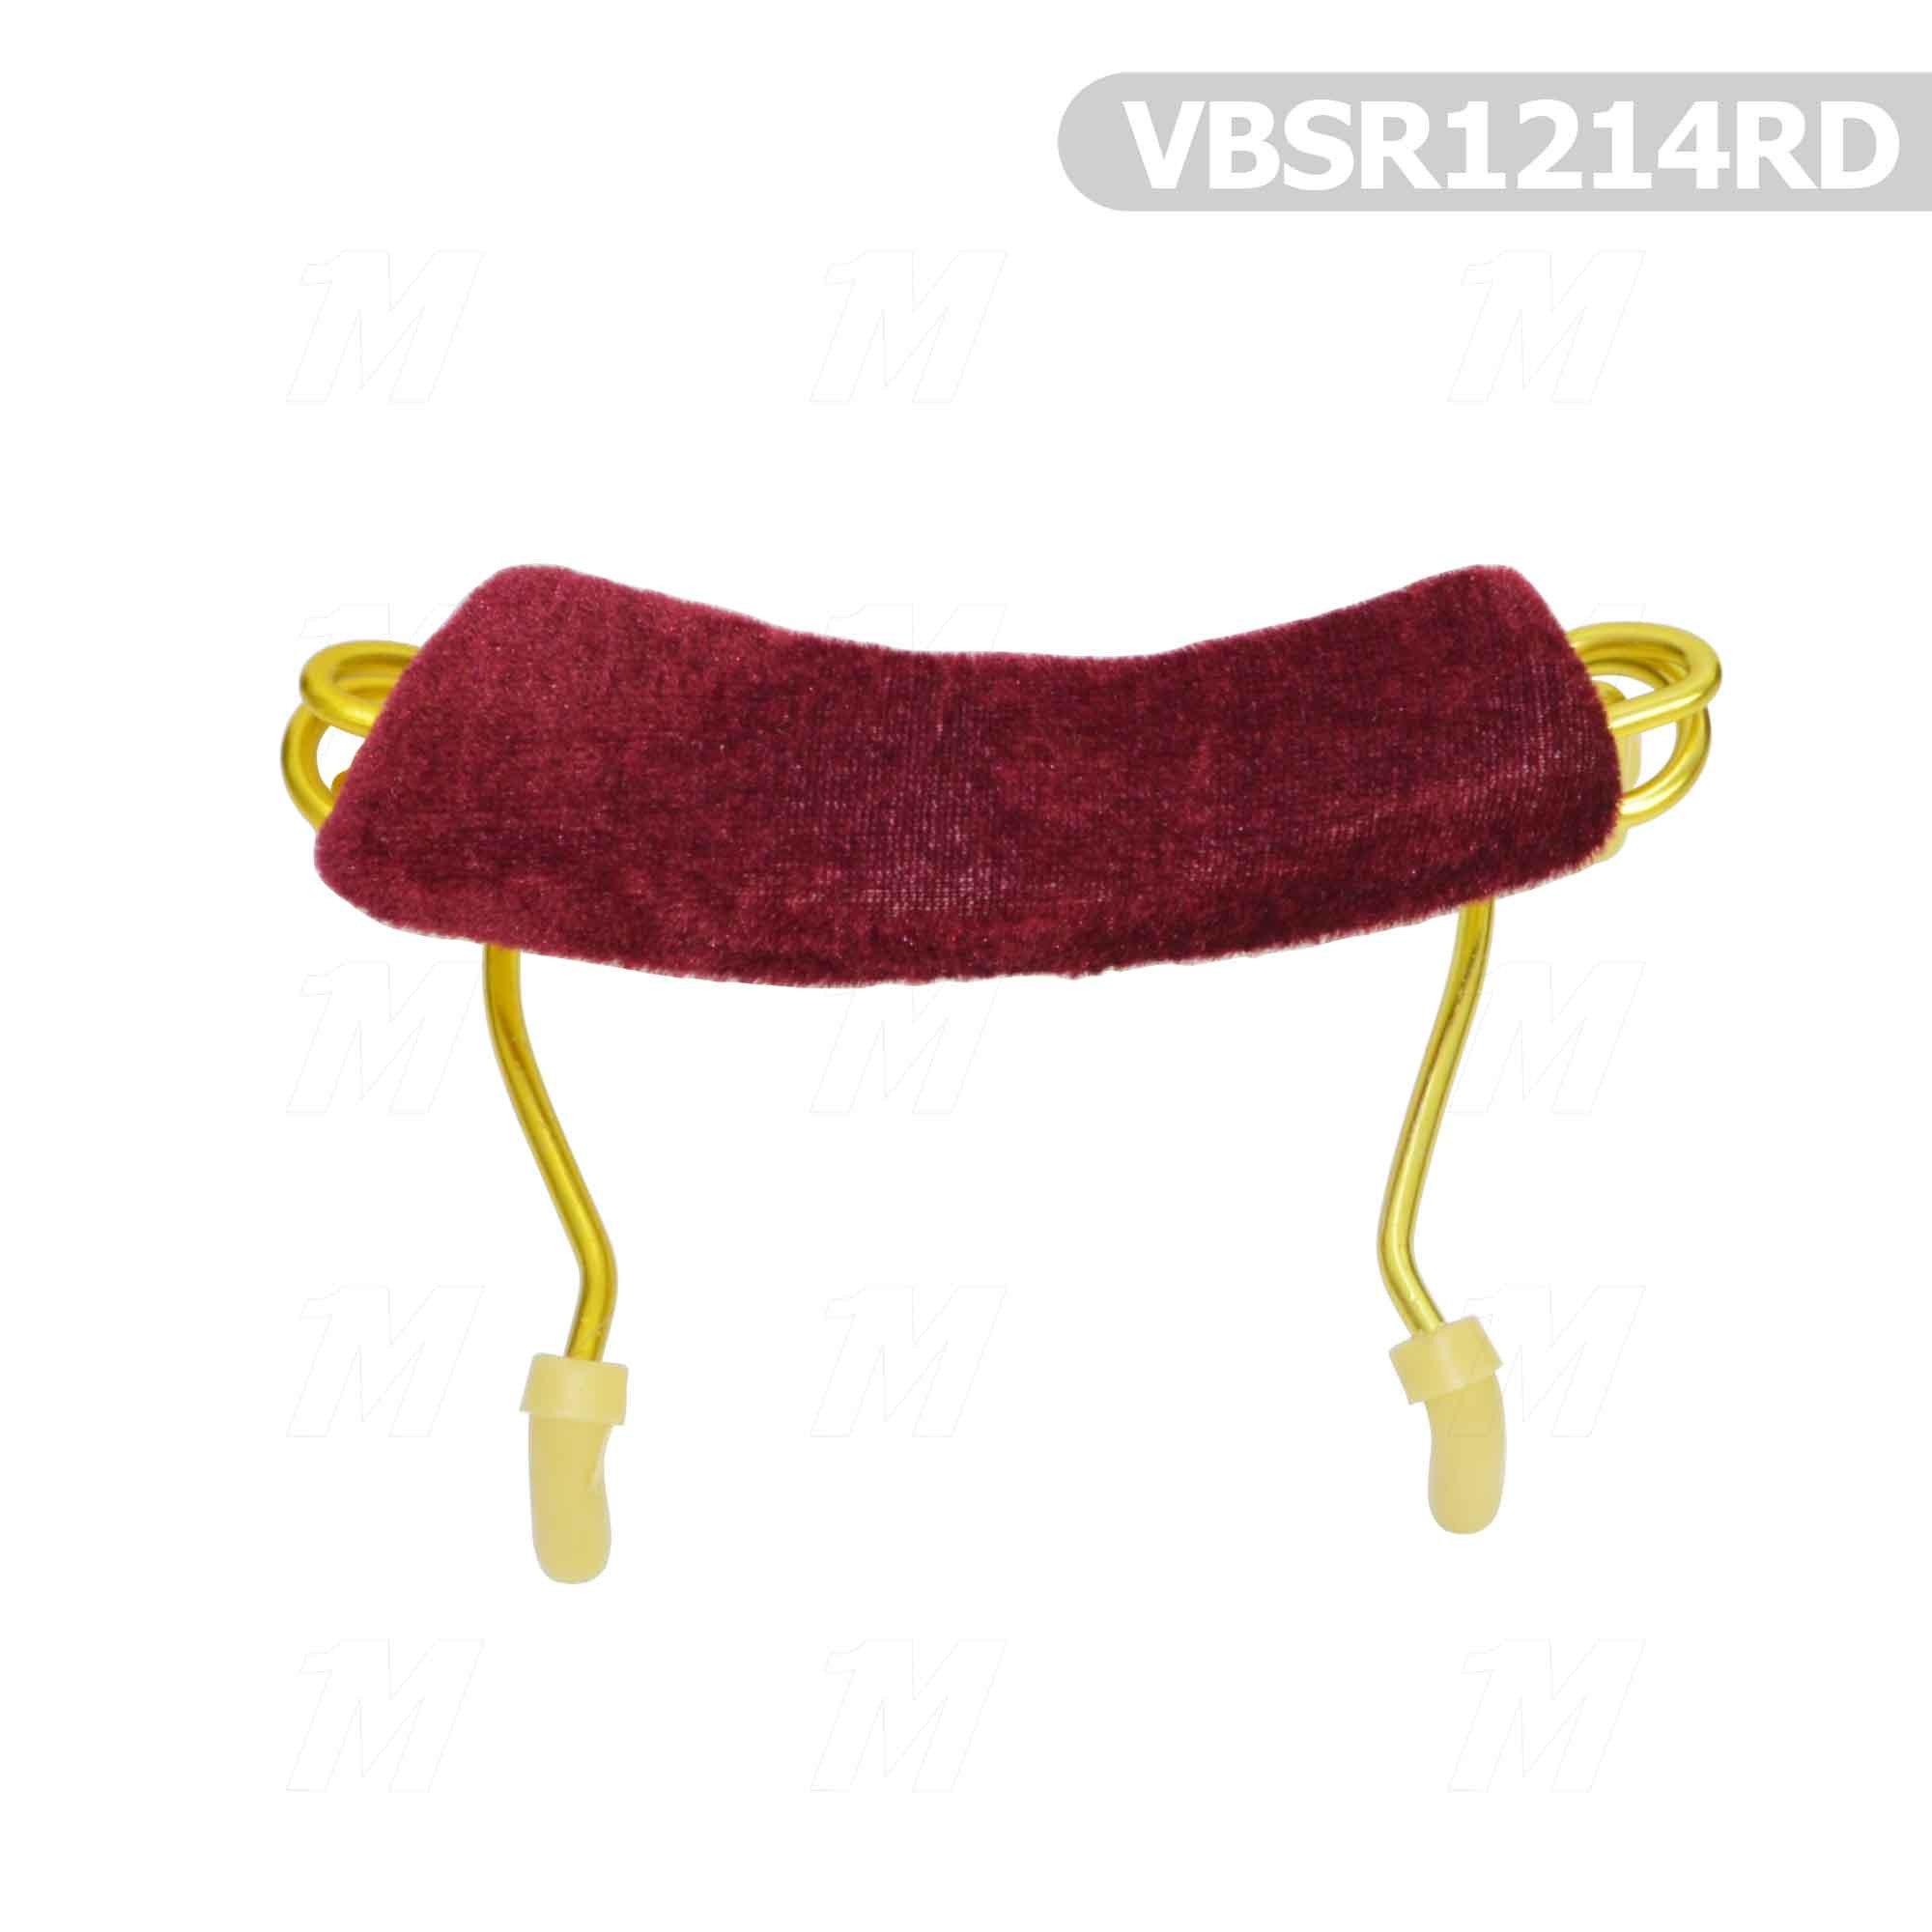 VIOLIN CUSHİON RED METAL 3/4 and 4/4 VBSR44RD